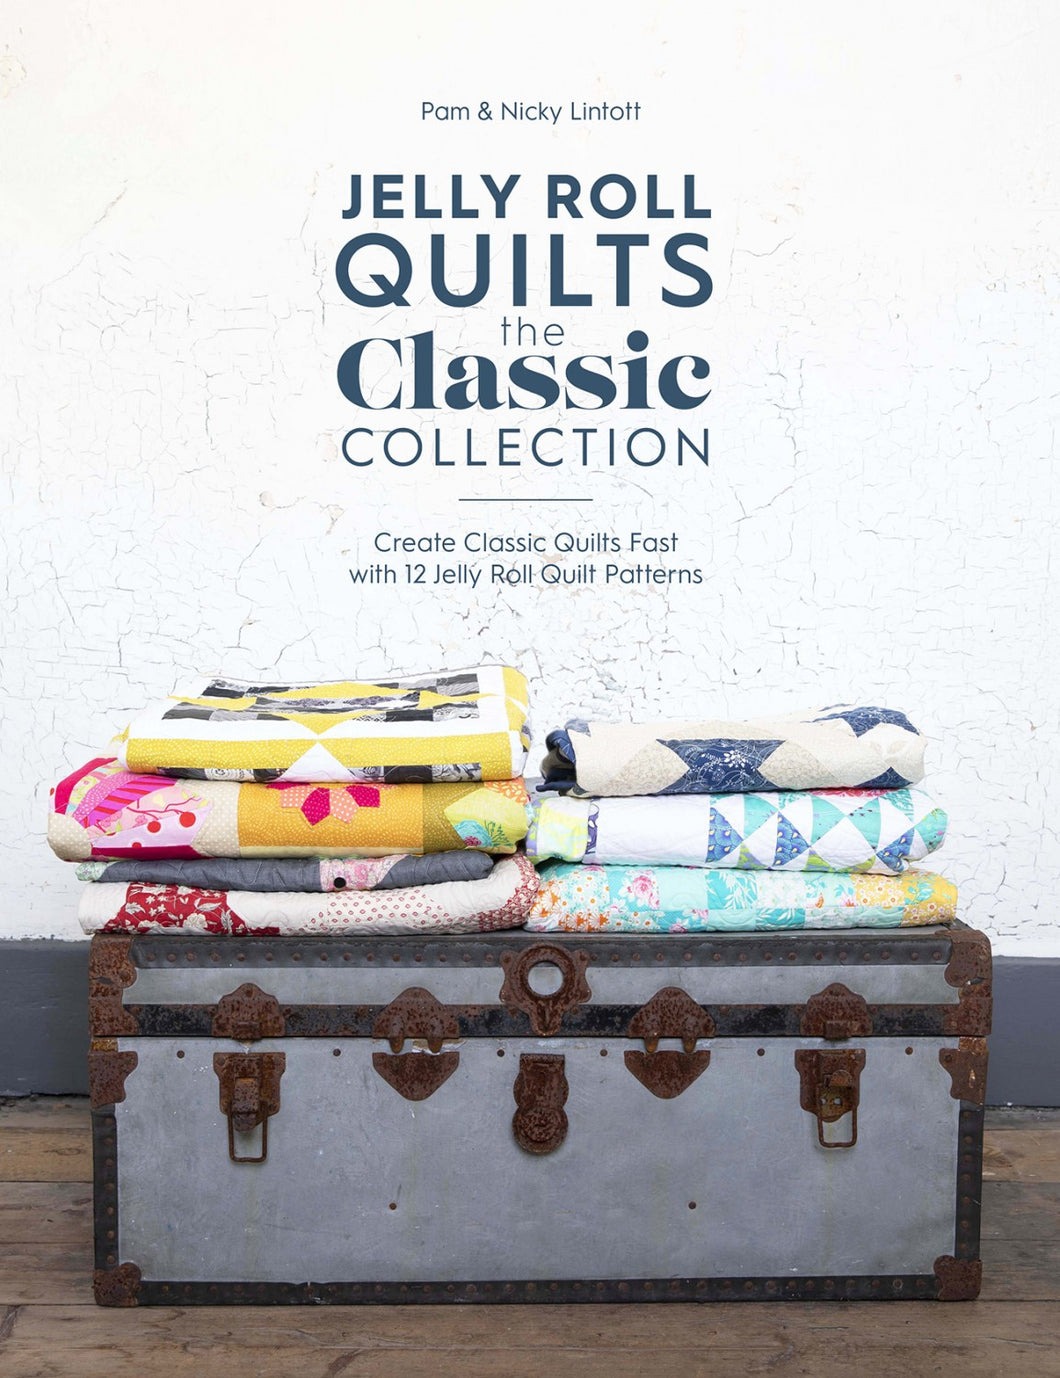 Jelly Roll Quilts Book